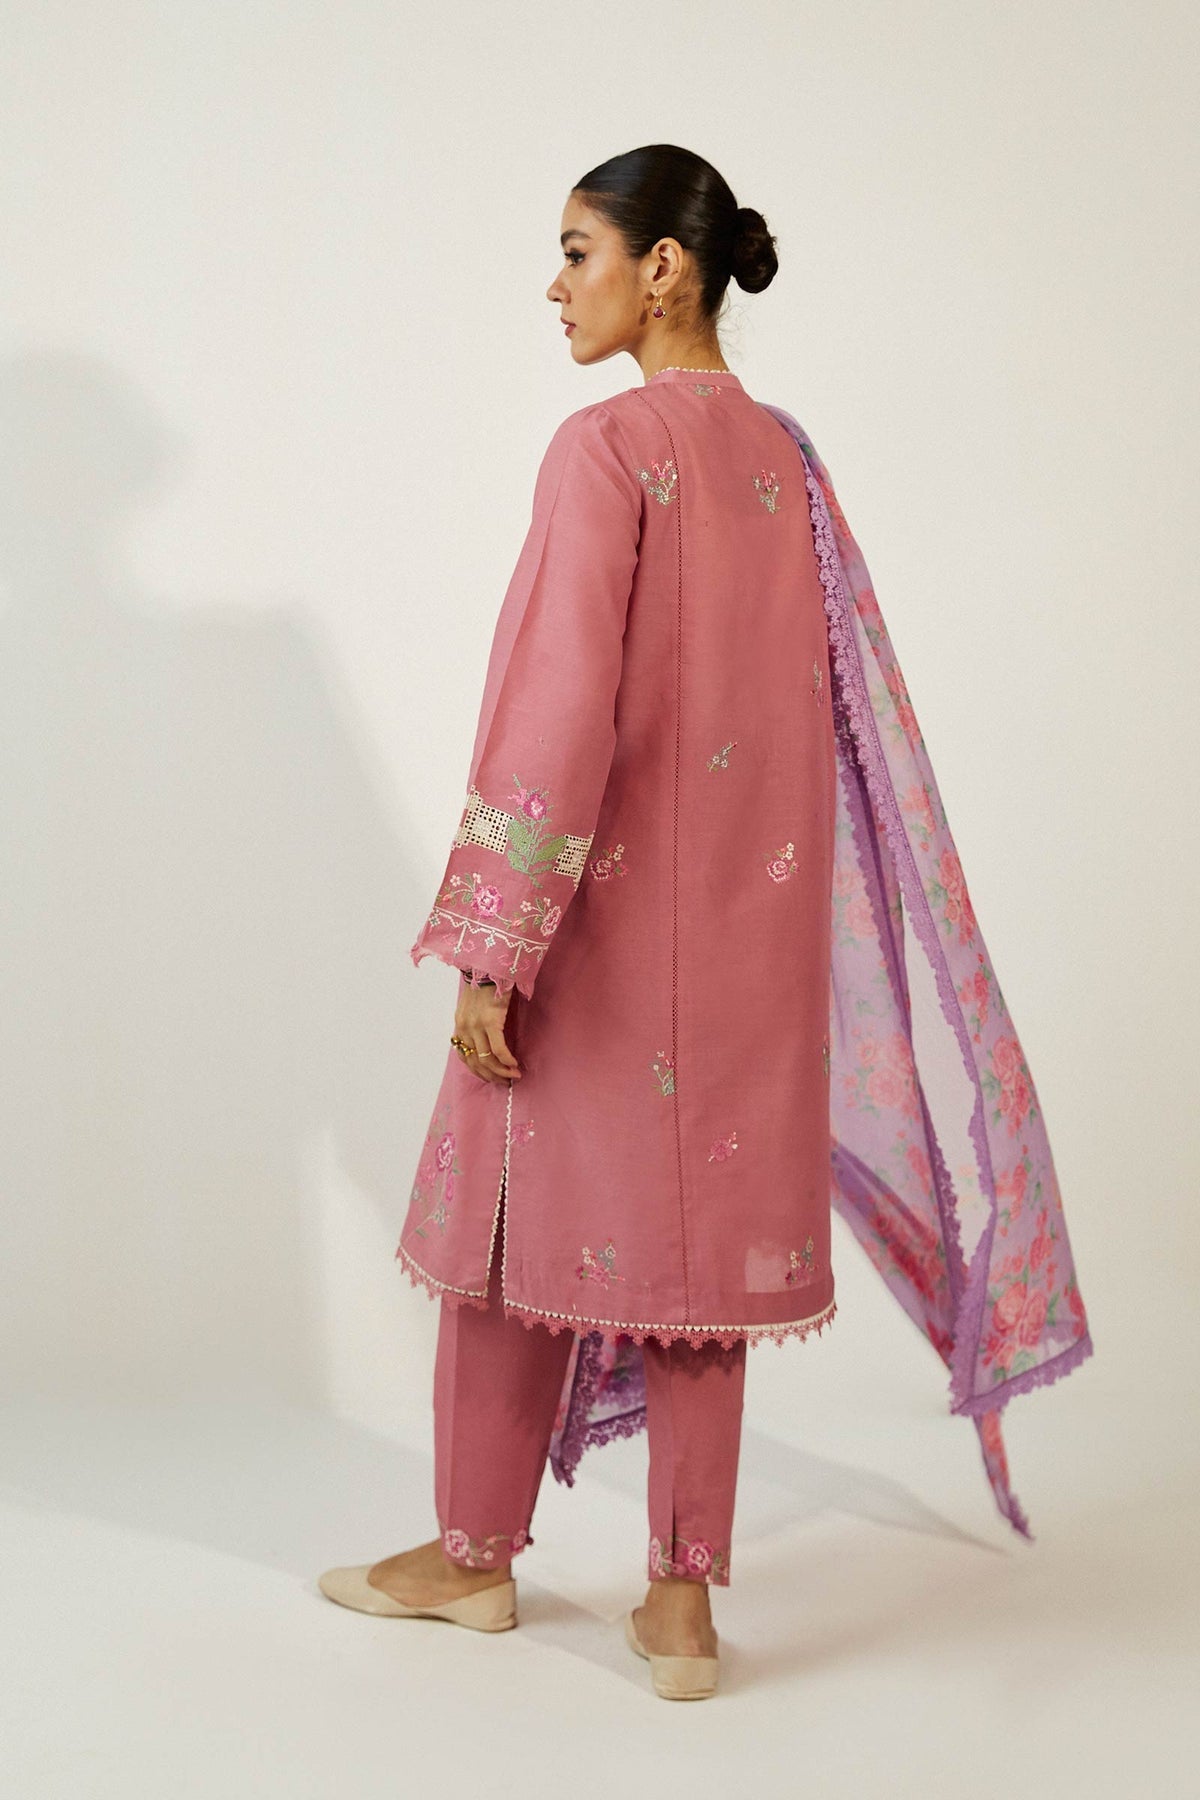 Buy Now, 2B - Coco Lawn Collection Vol.2 - Zara Shahjahan - Coco by Zara Shahjahan - Shahana Collection UK - Wedding and Bridal Party Dresses - Summer Lawn 2023